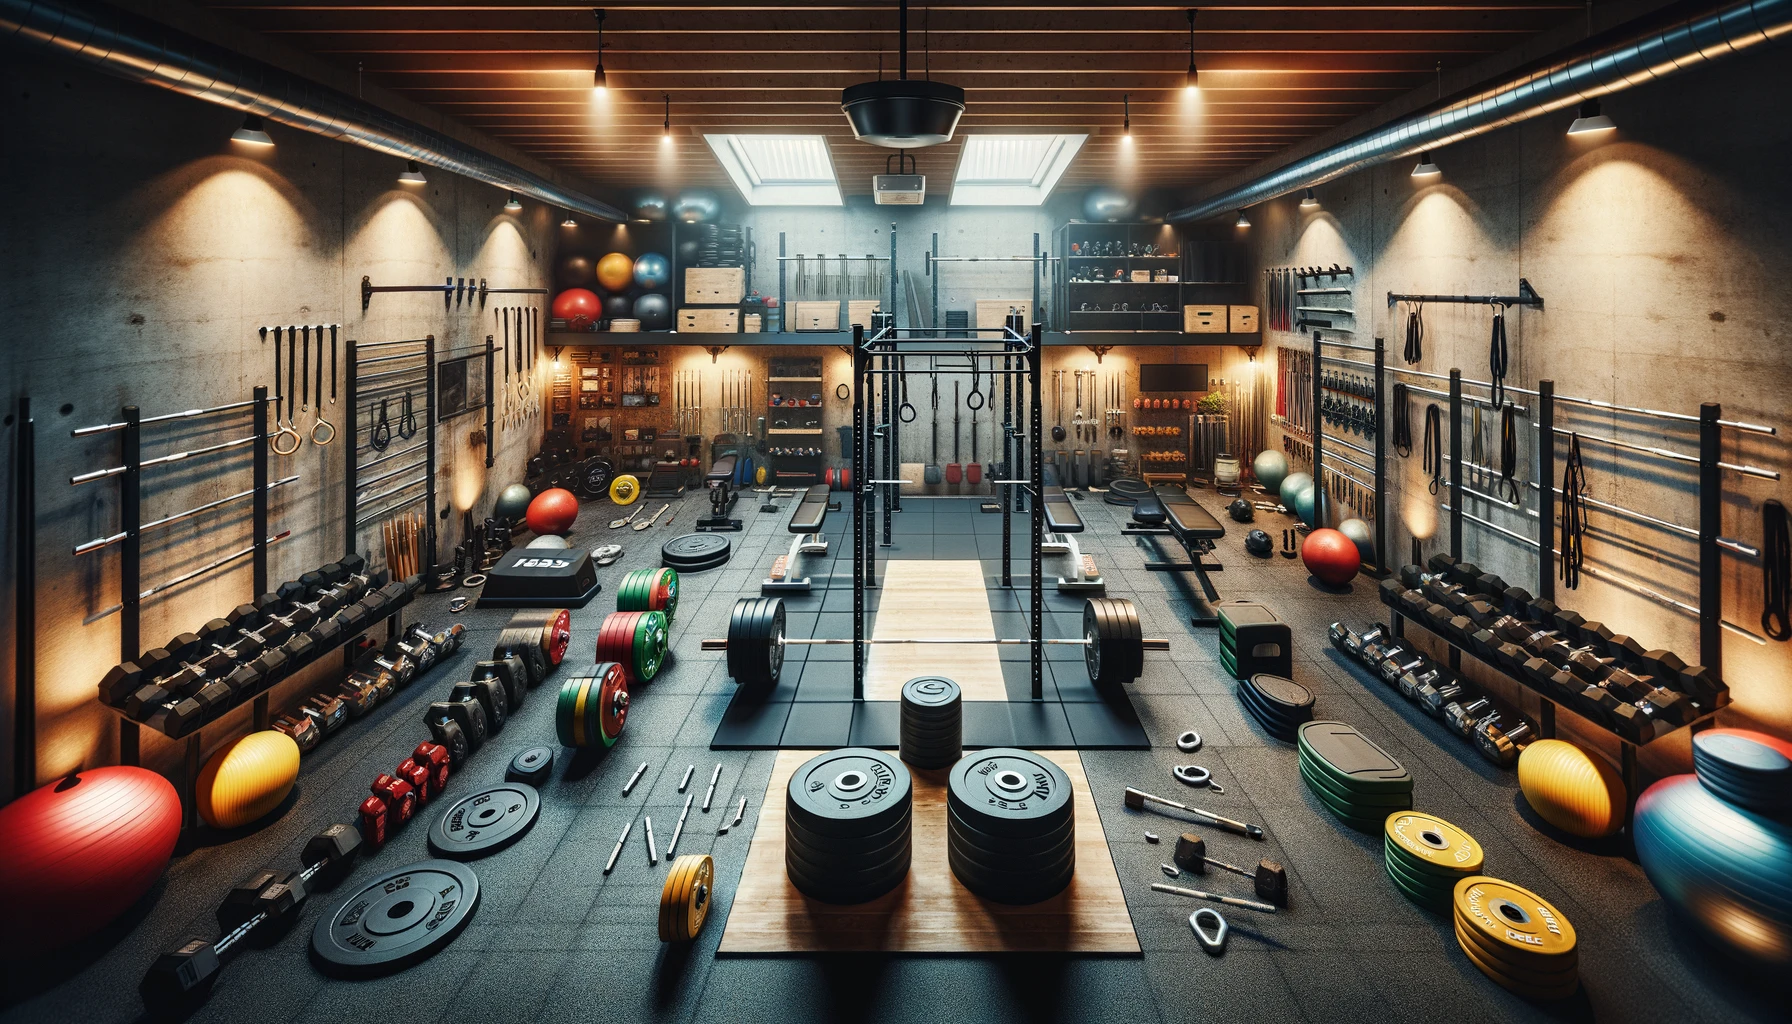 Well-equipped modern gym interior with weightlifting equipment